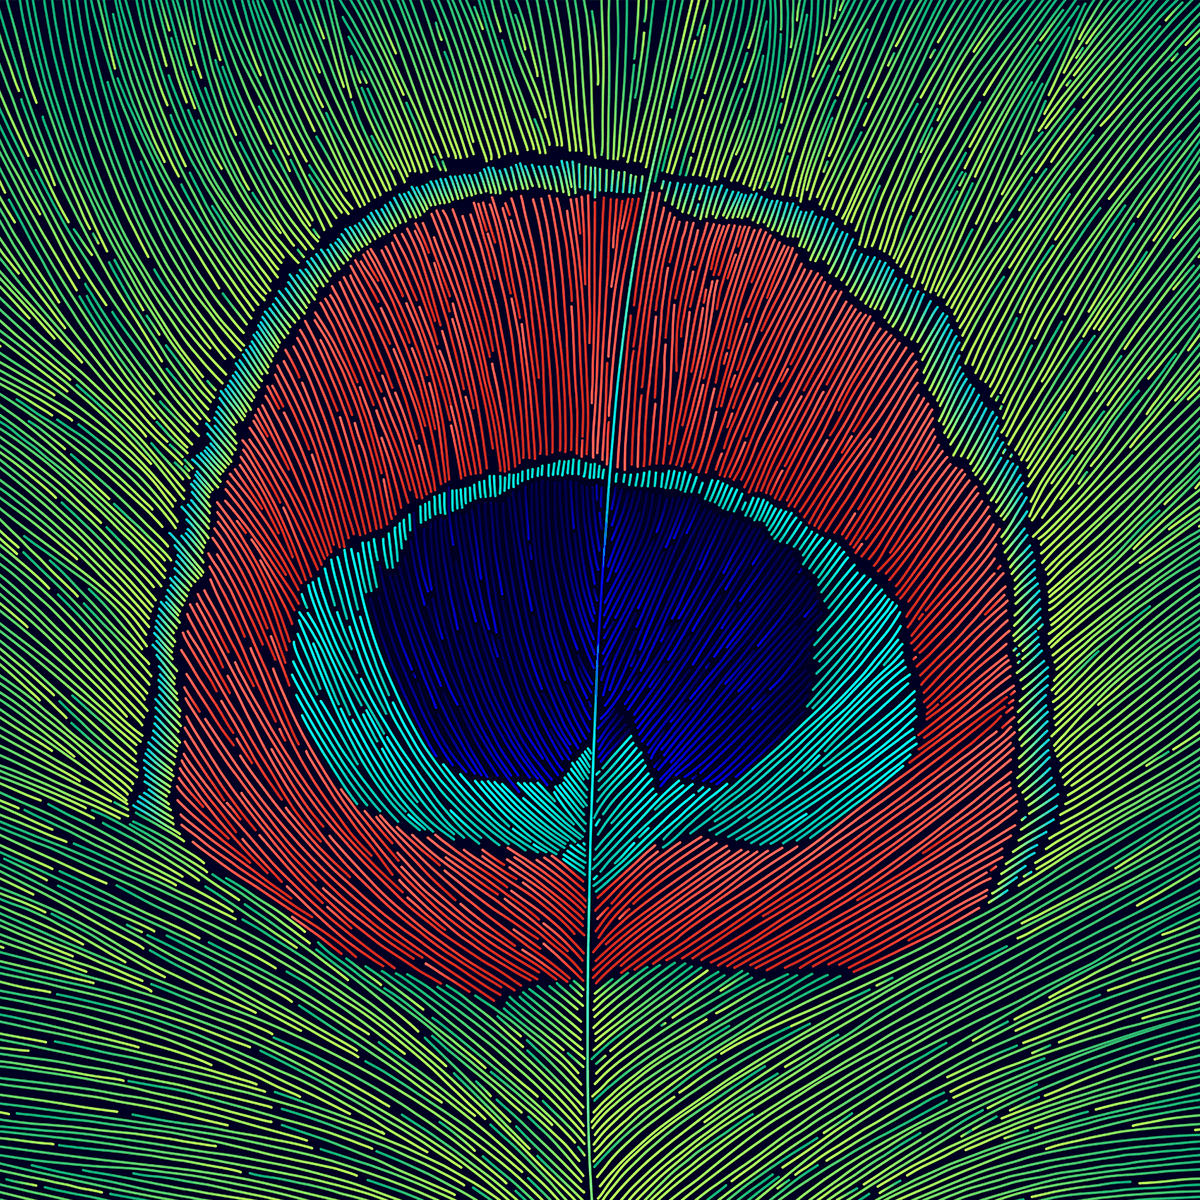 Peacock plume illustration made of dense lines